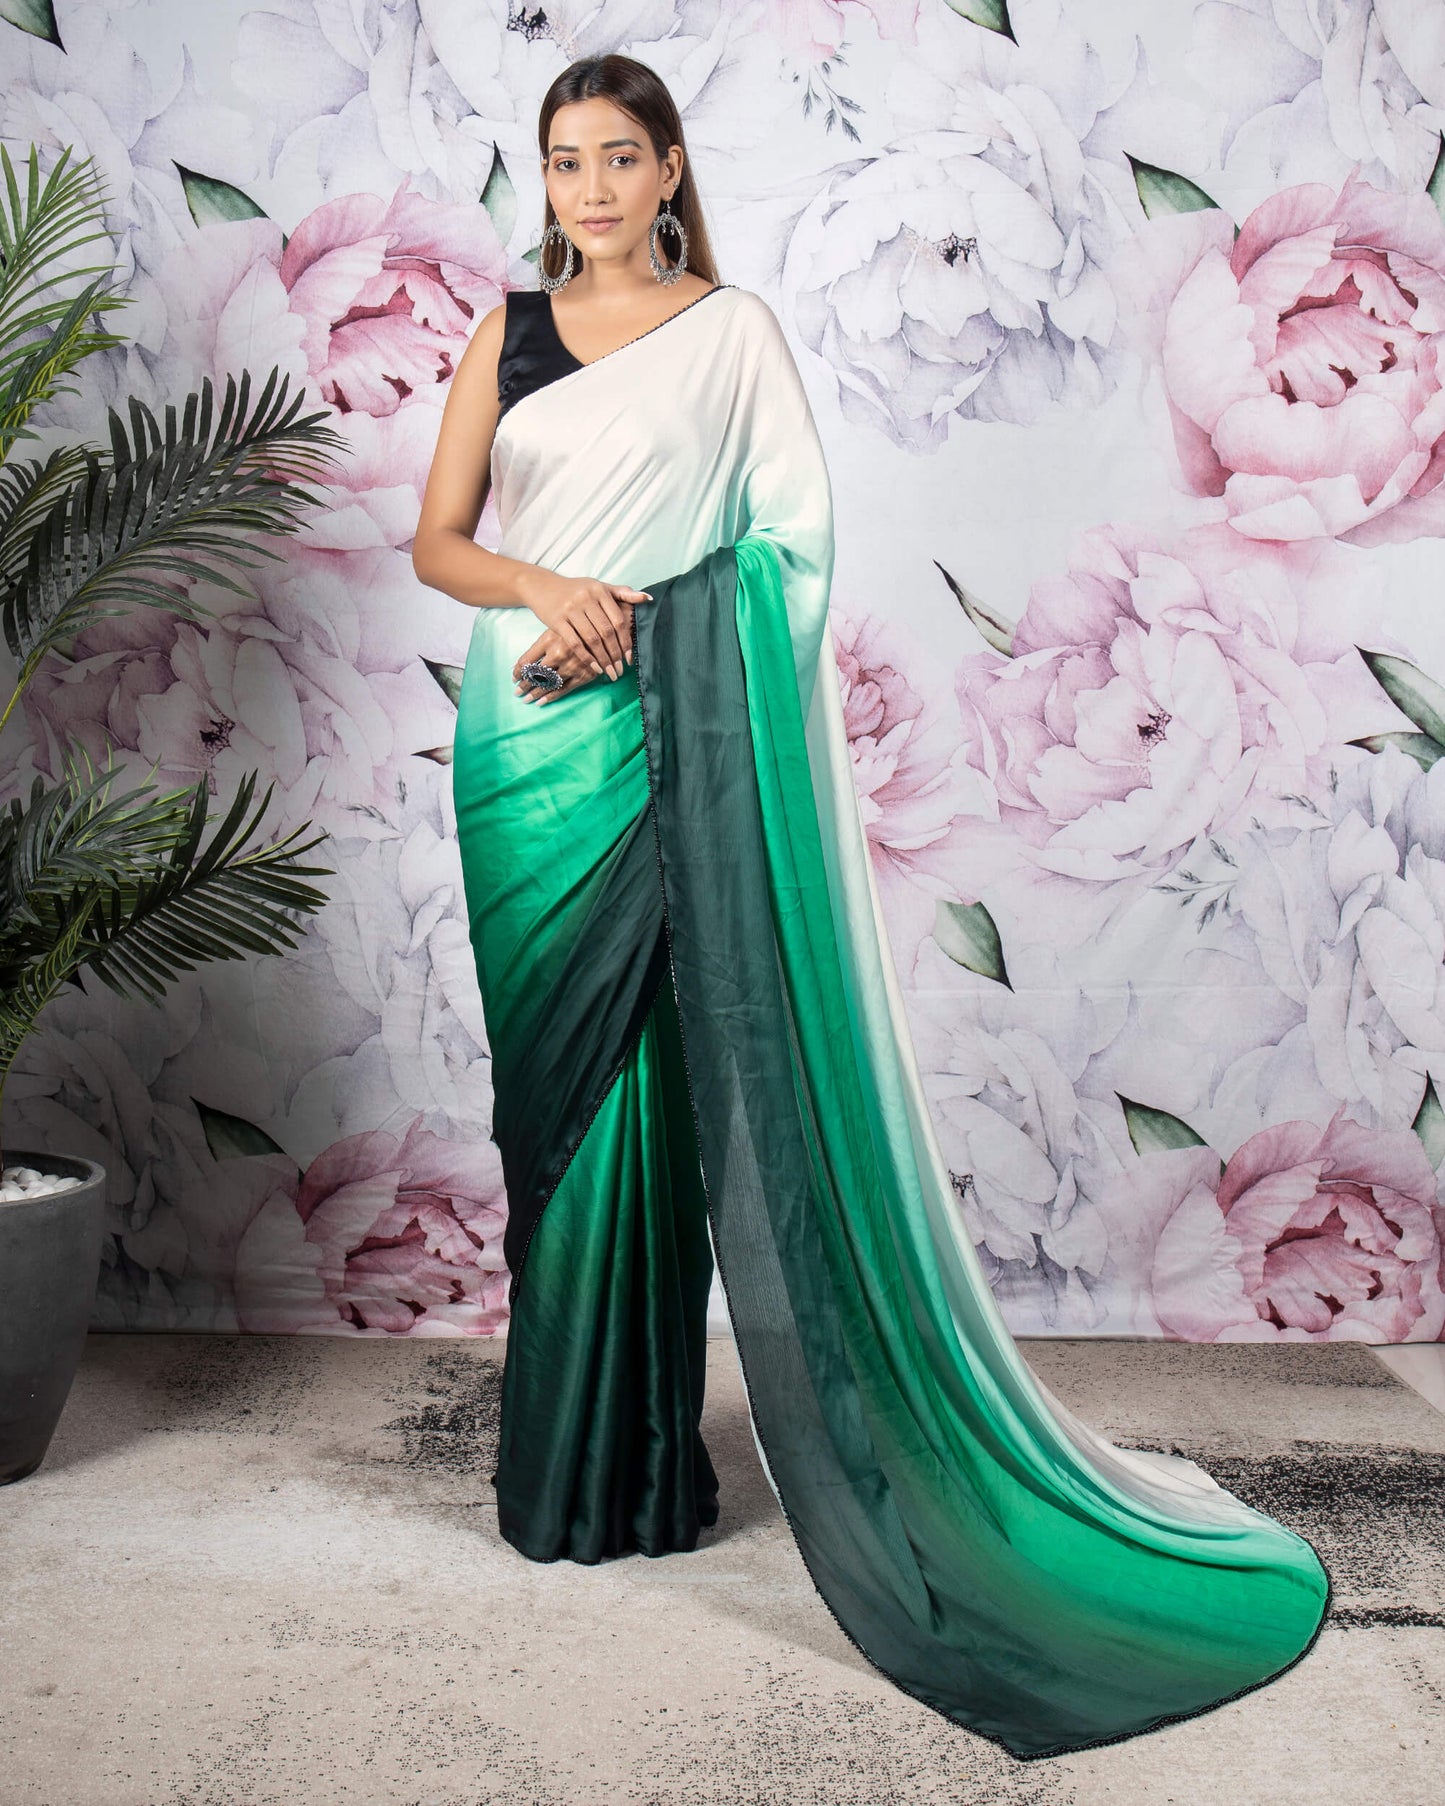 Green And White Ombre Pattern Digital Print Chiffon Satin Saree With Pearl Work Lace Border